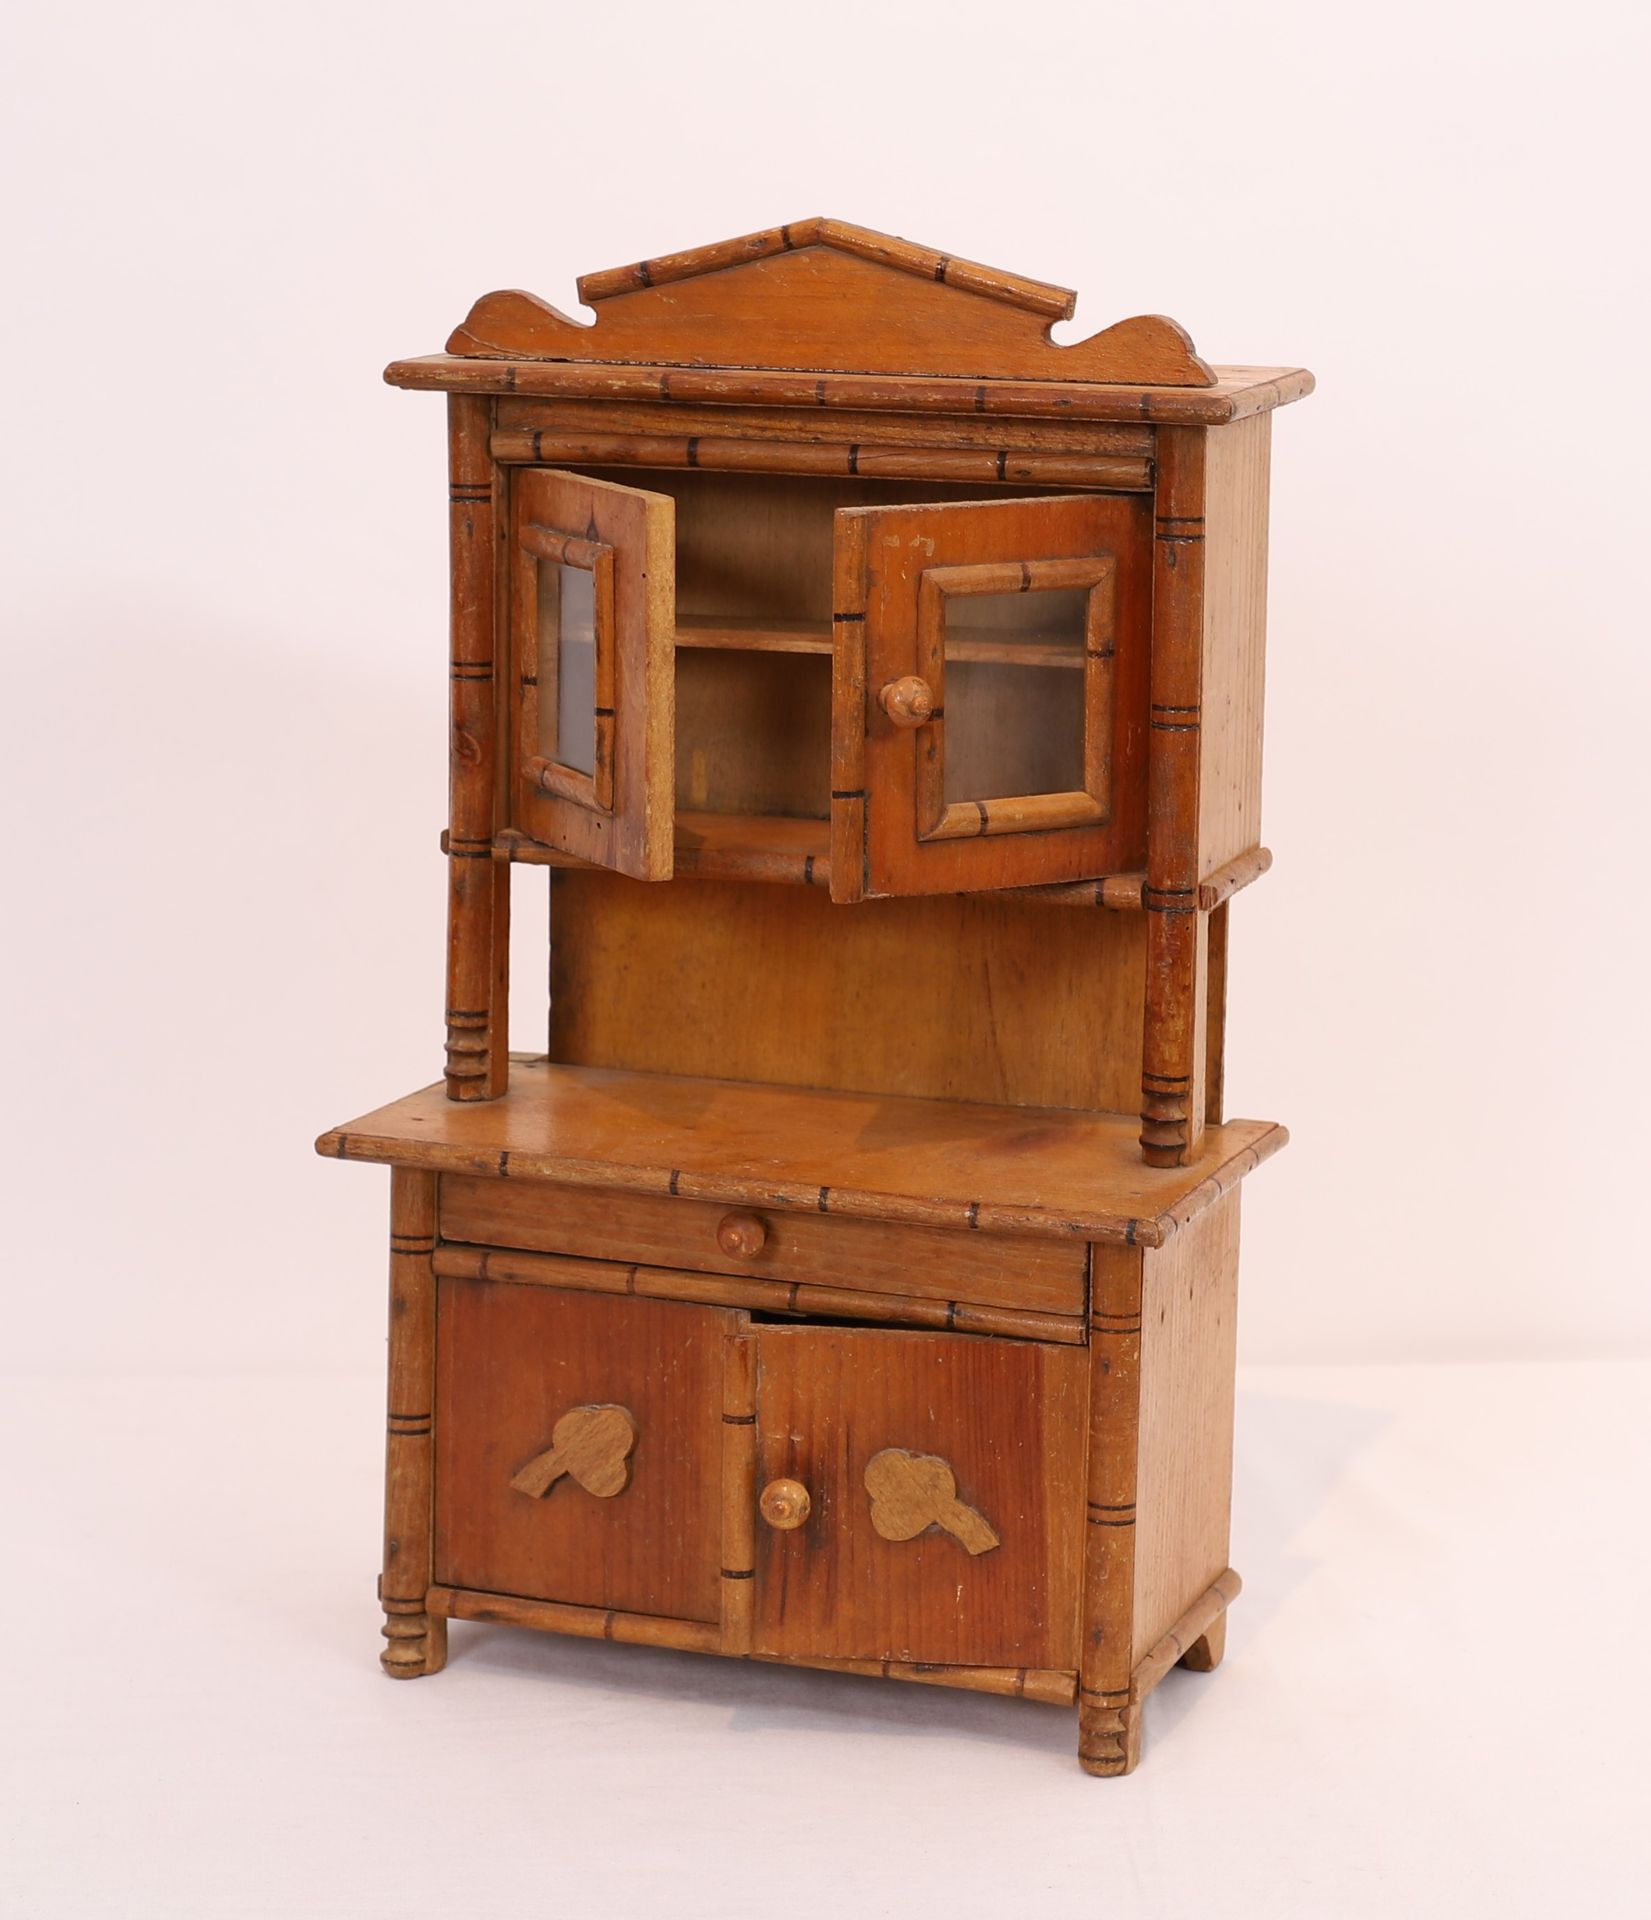 Null DOLL'S CHINA CABINET IN PITCHPIN

41 x 24 x 12 cm